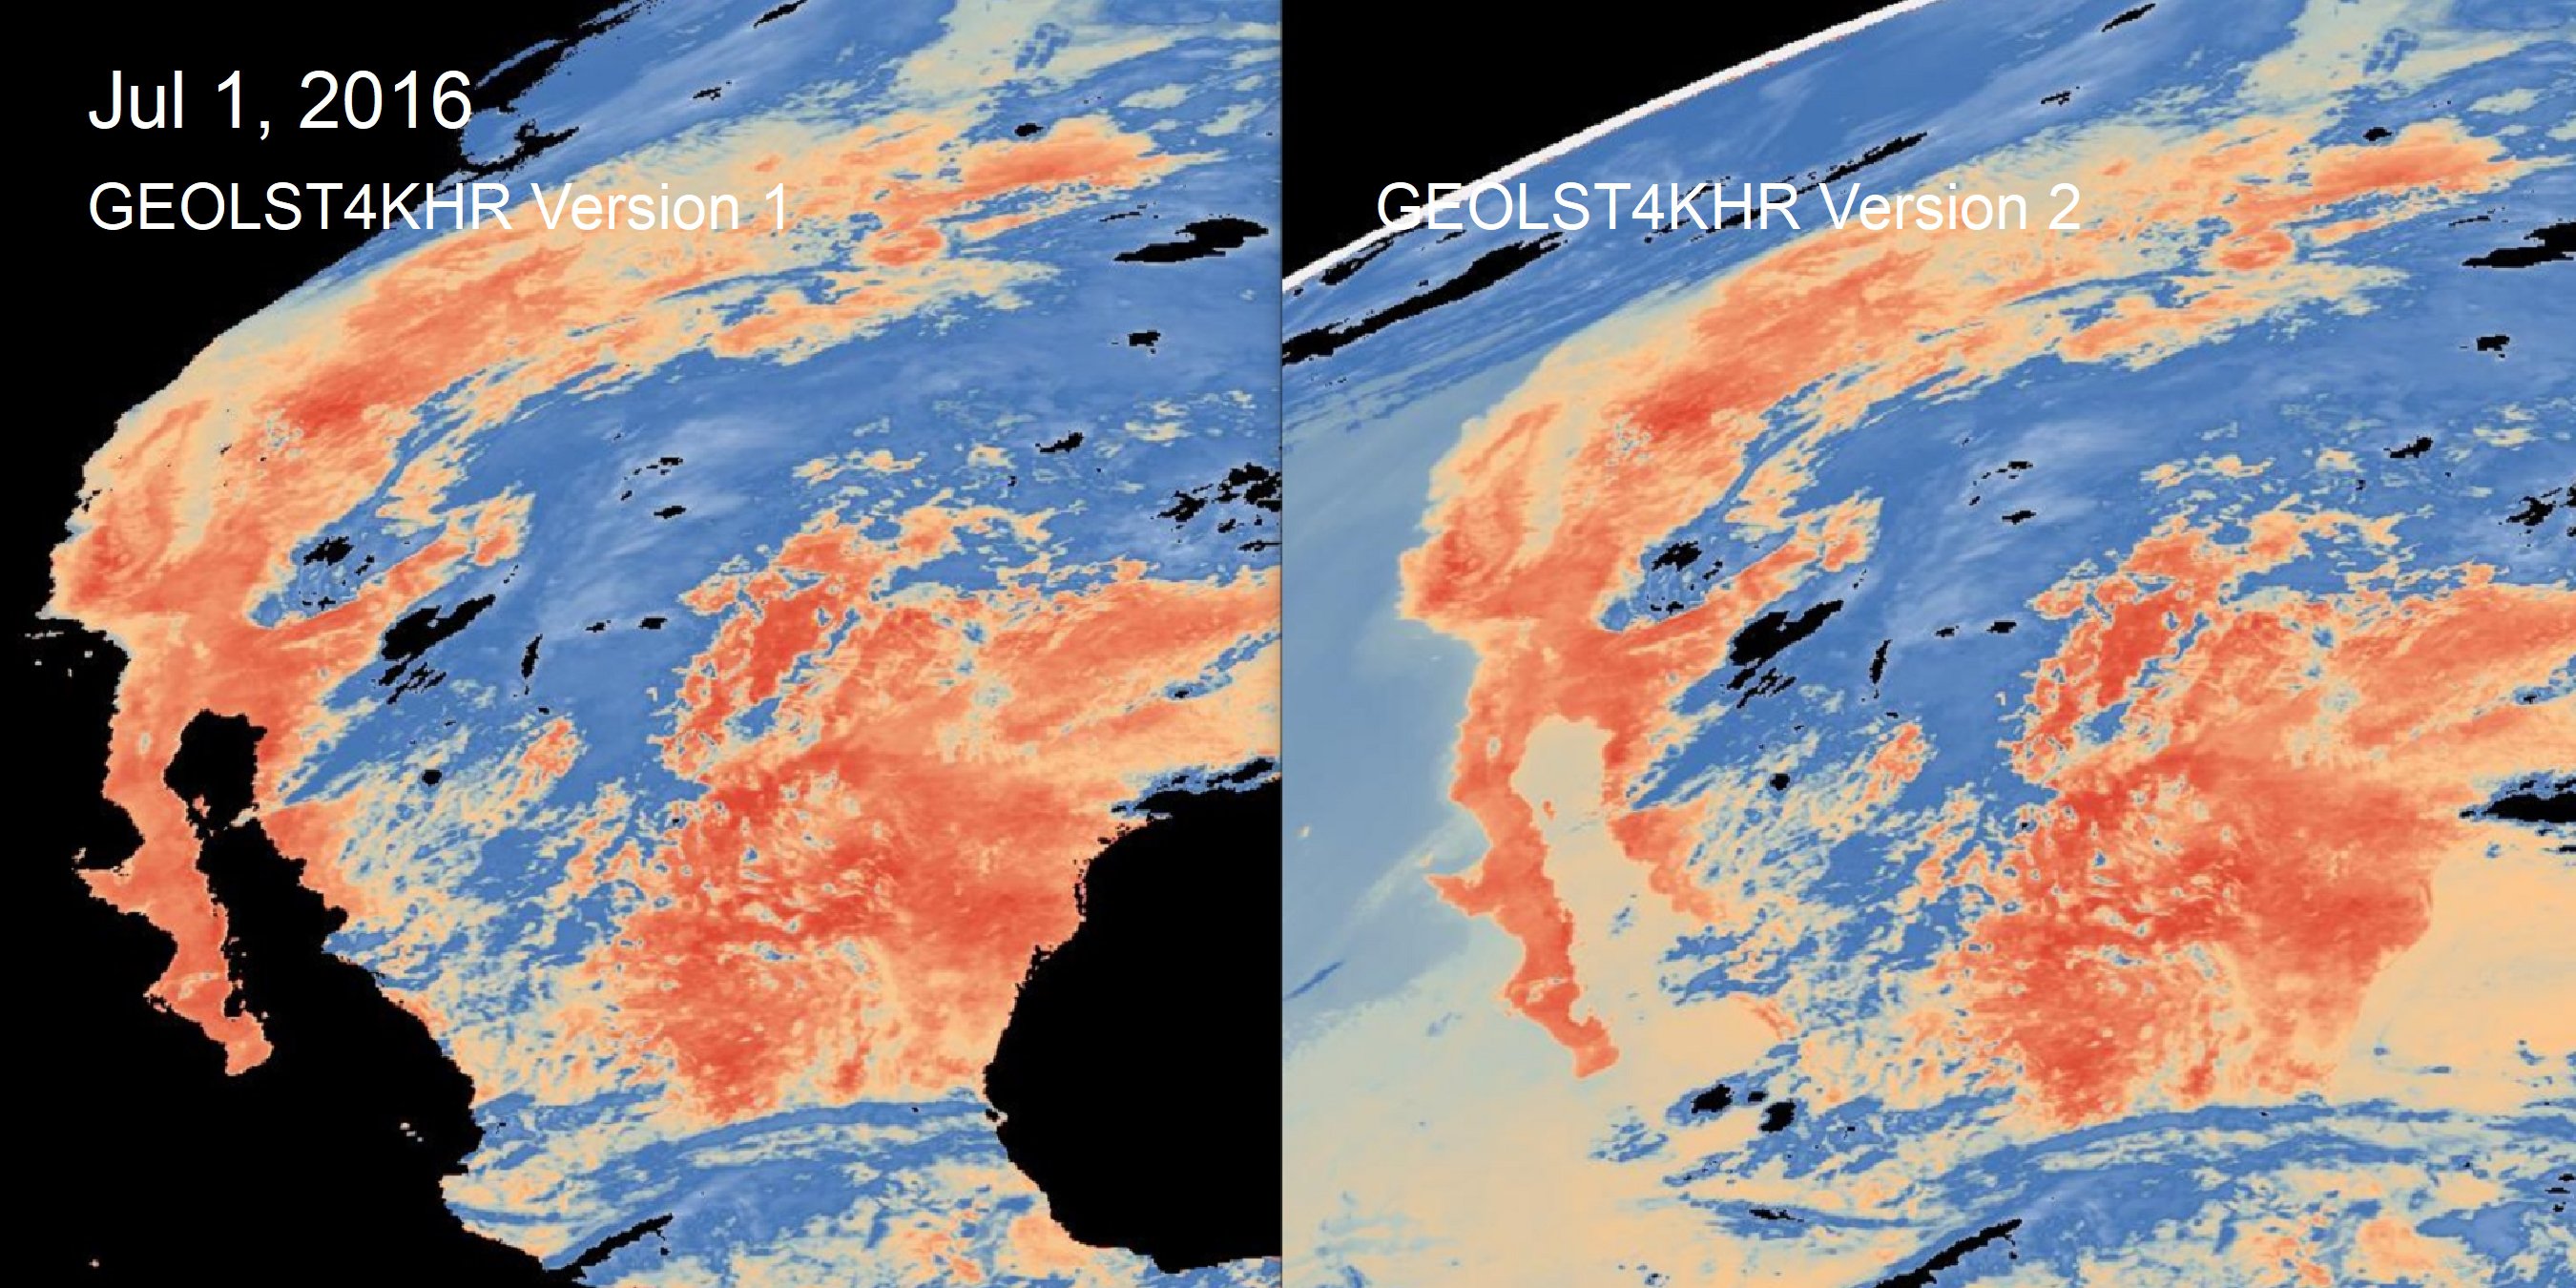 Two images showing Geostationary Earth Orbit Land Surface Temperature (GEOLST4KHR) version 2 data over North America. The left image shows the newer version which now includes LST data over ocean and sea.